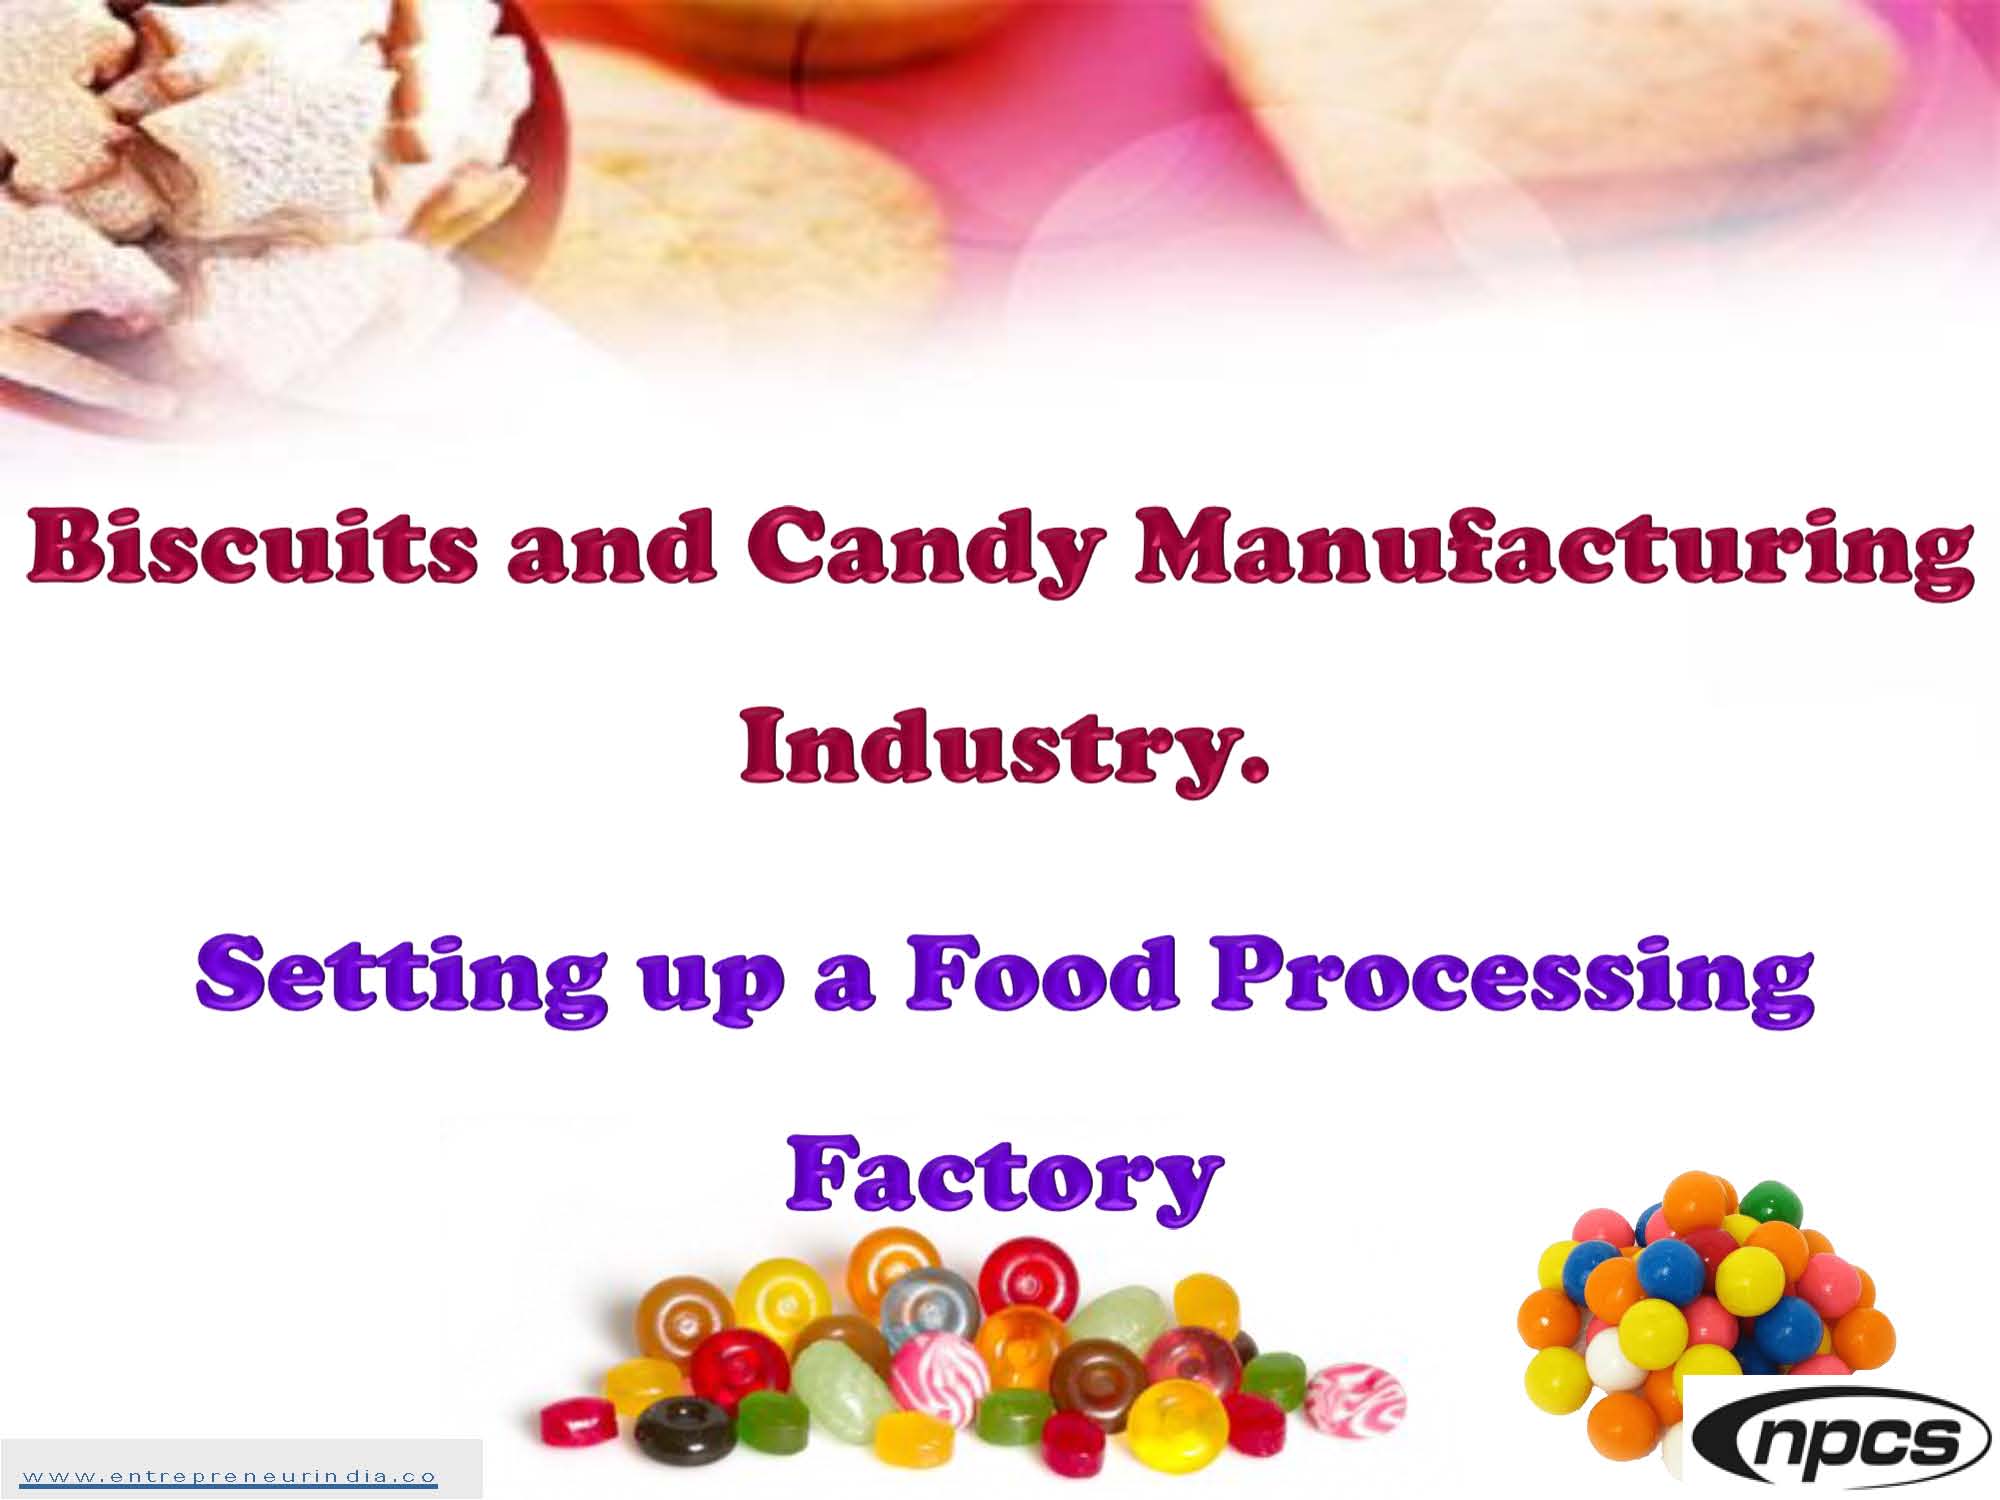 Biscuits and Candy Manufacturing Industry